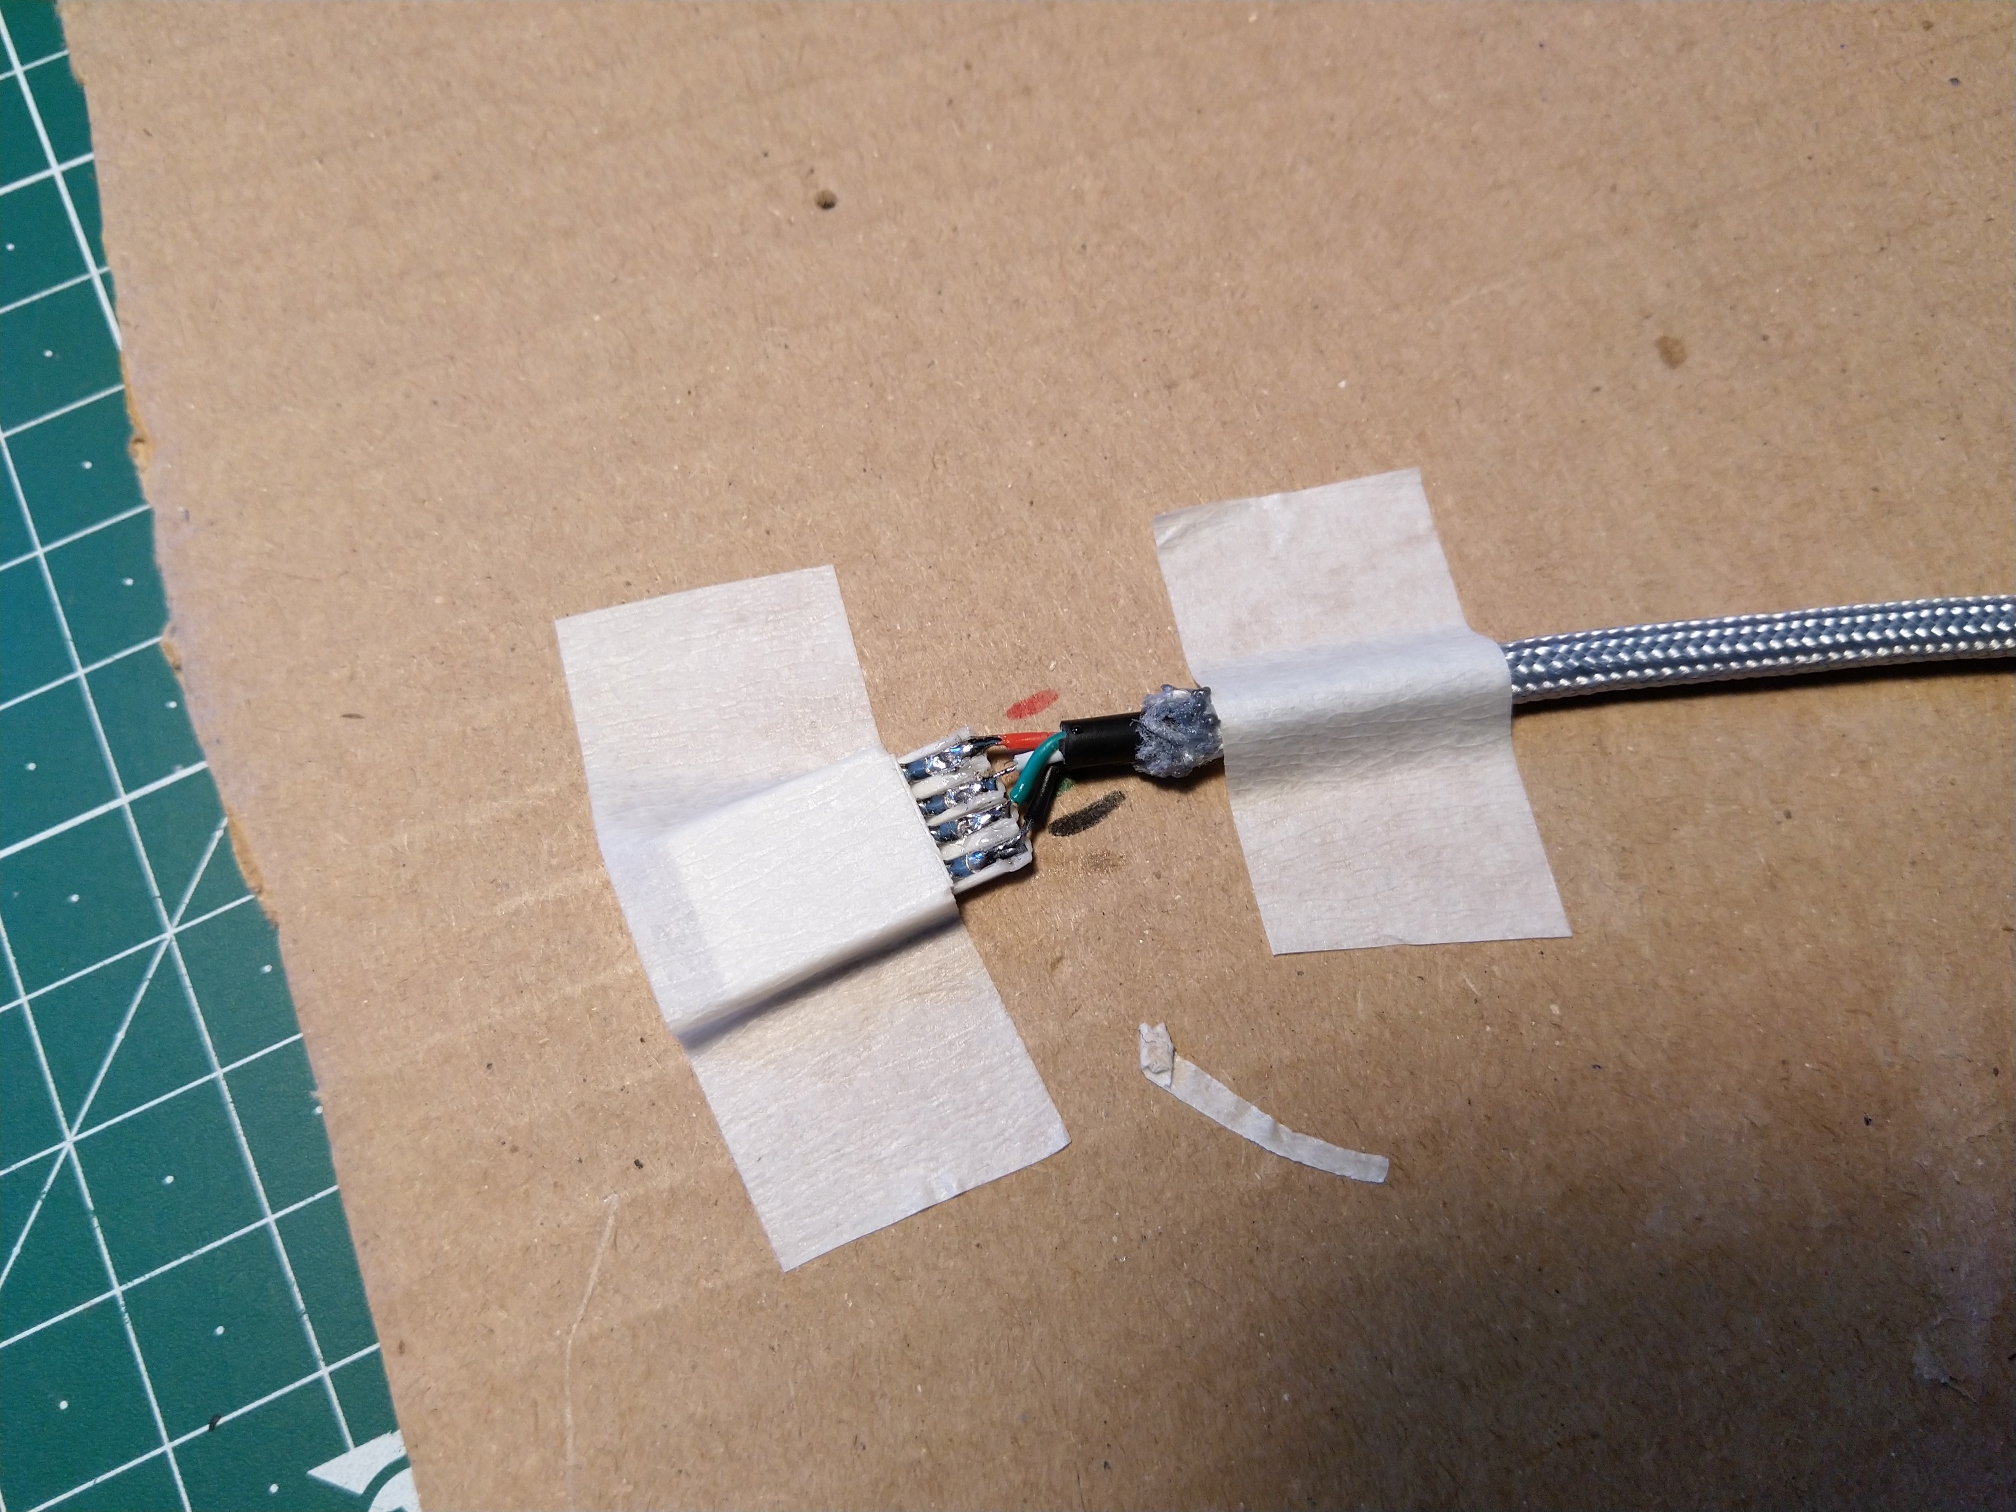 USB-A, again, don't forget to put the inner heat-shrink on the cable.